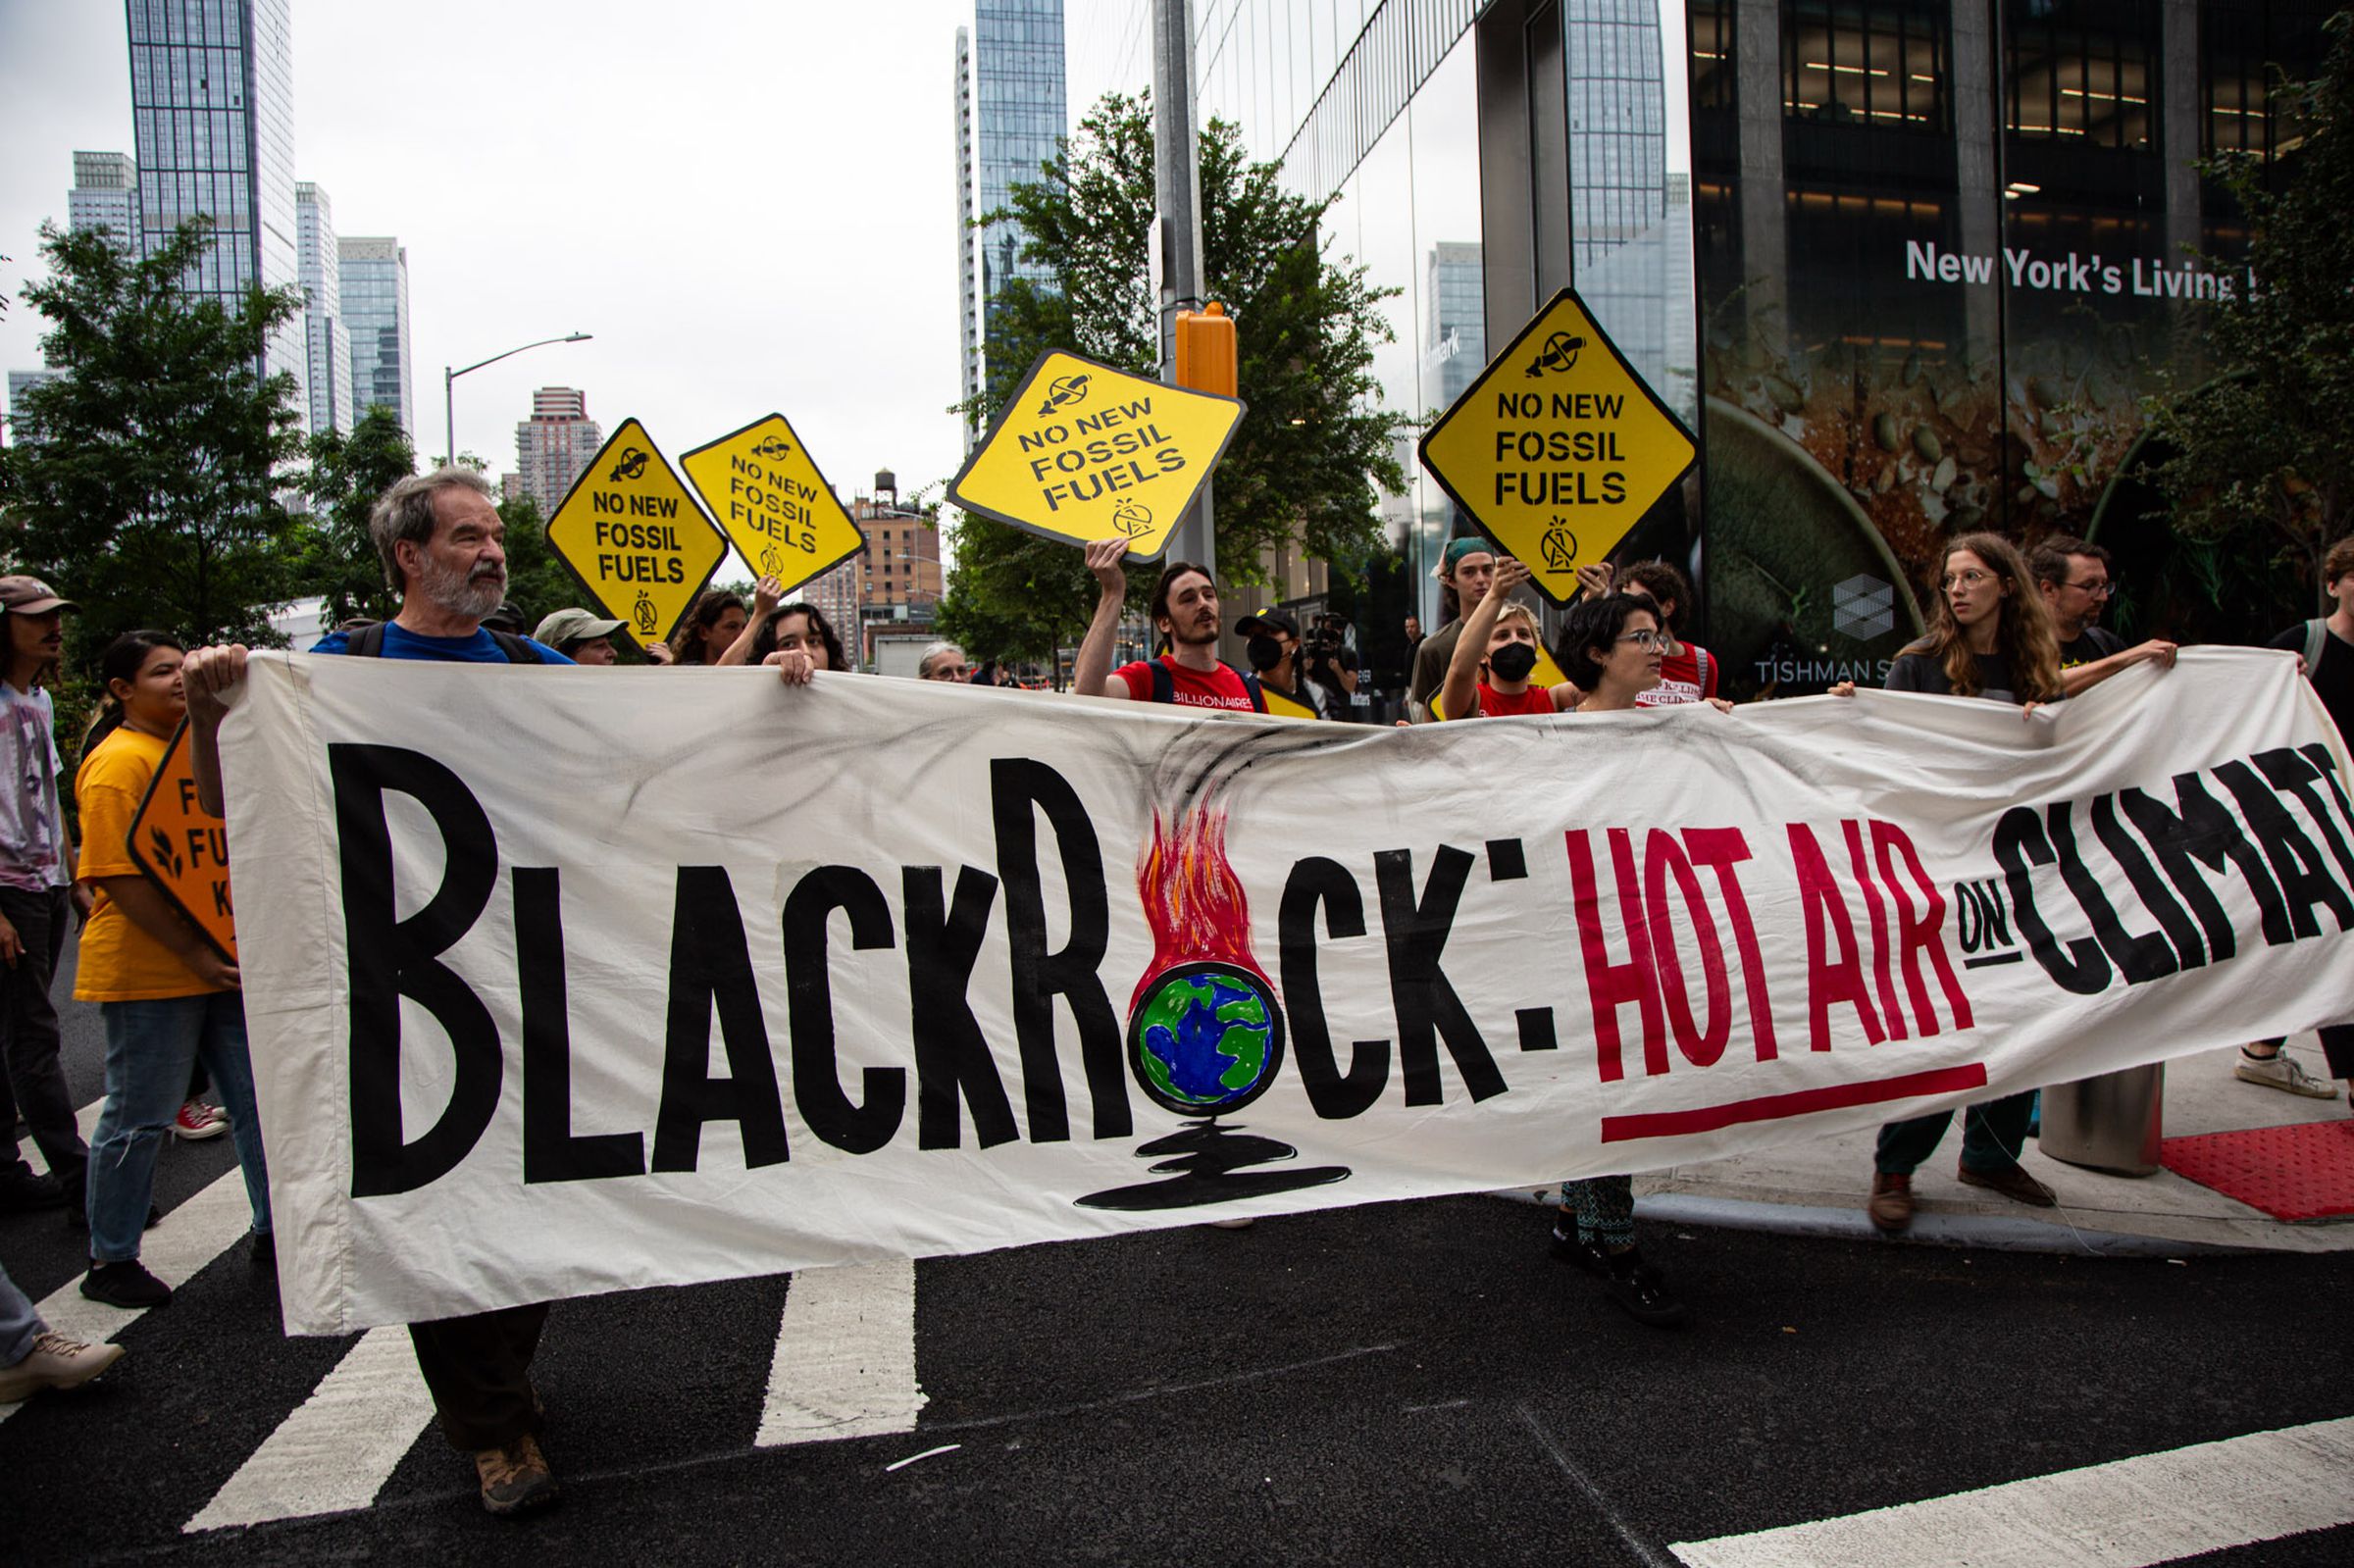 A group of people hold a banner that says, “BlackRock: Hot Air on Climate.”